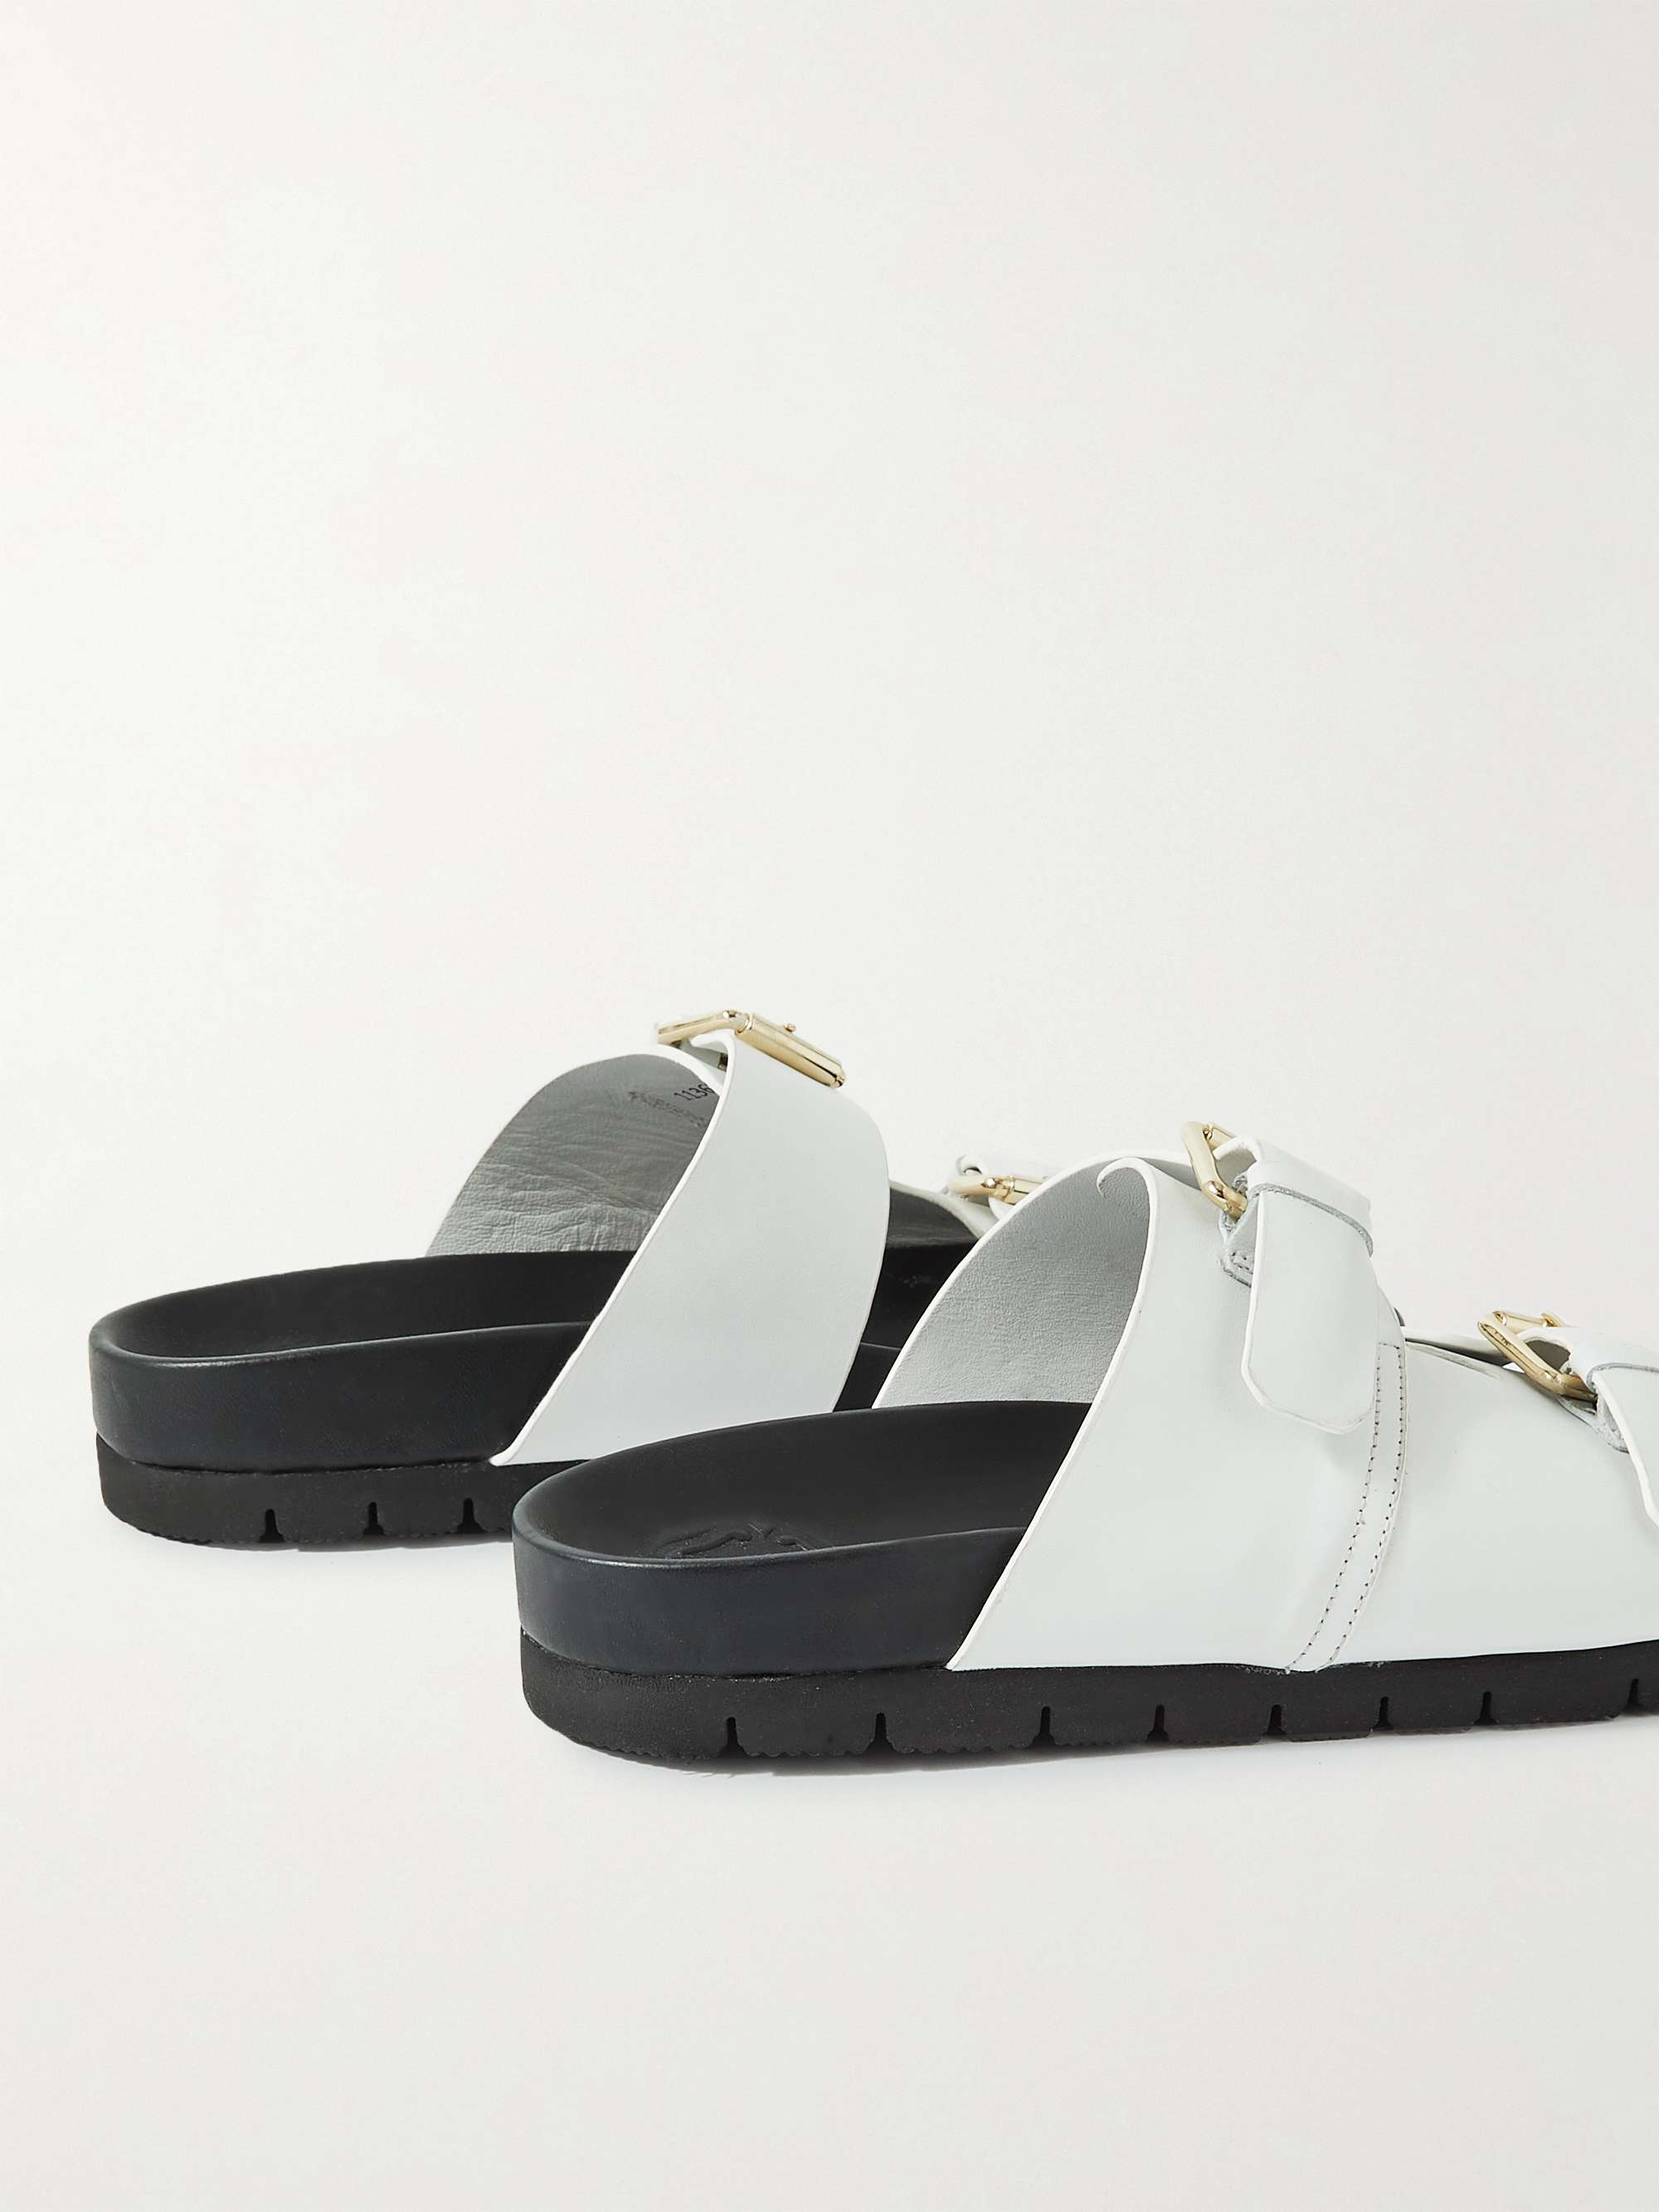 GRENSON Florin Leather Sandals